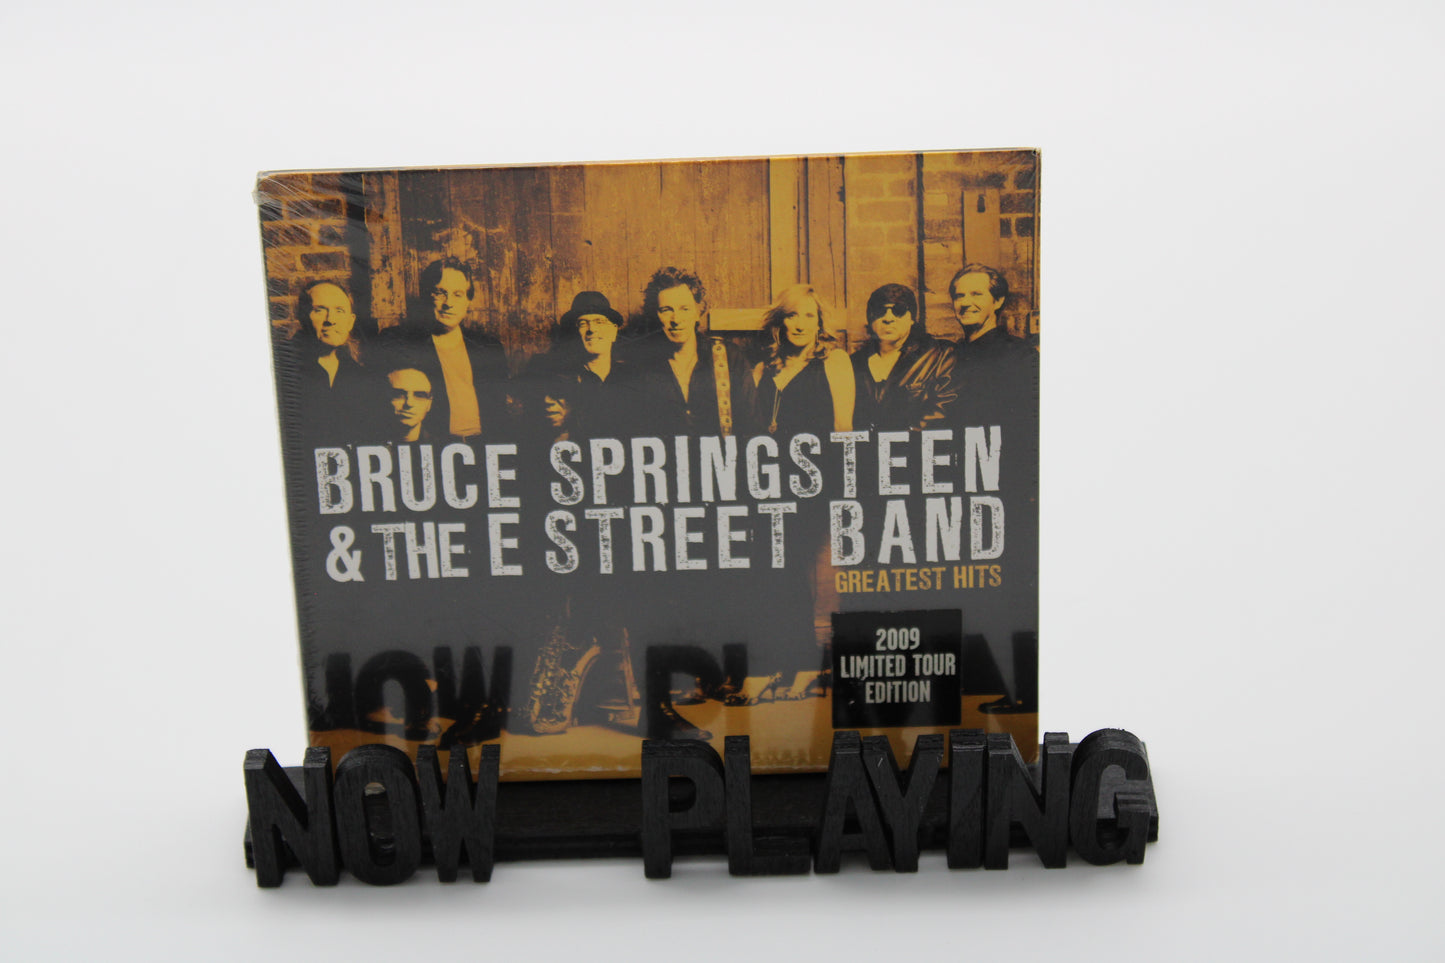 Bruce Springsteen SEALED Concert Tour "2009 Limited Tour Edition" CD/Sealed Collectible